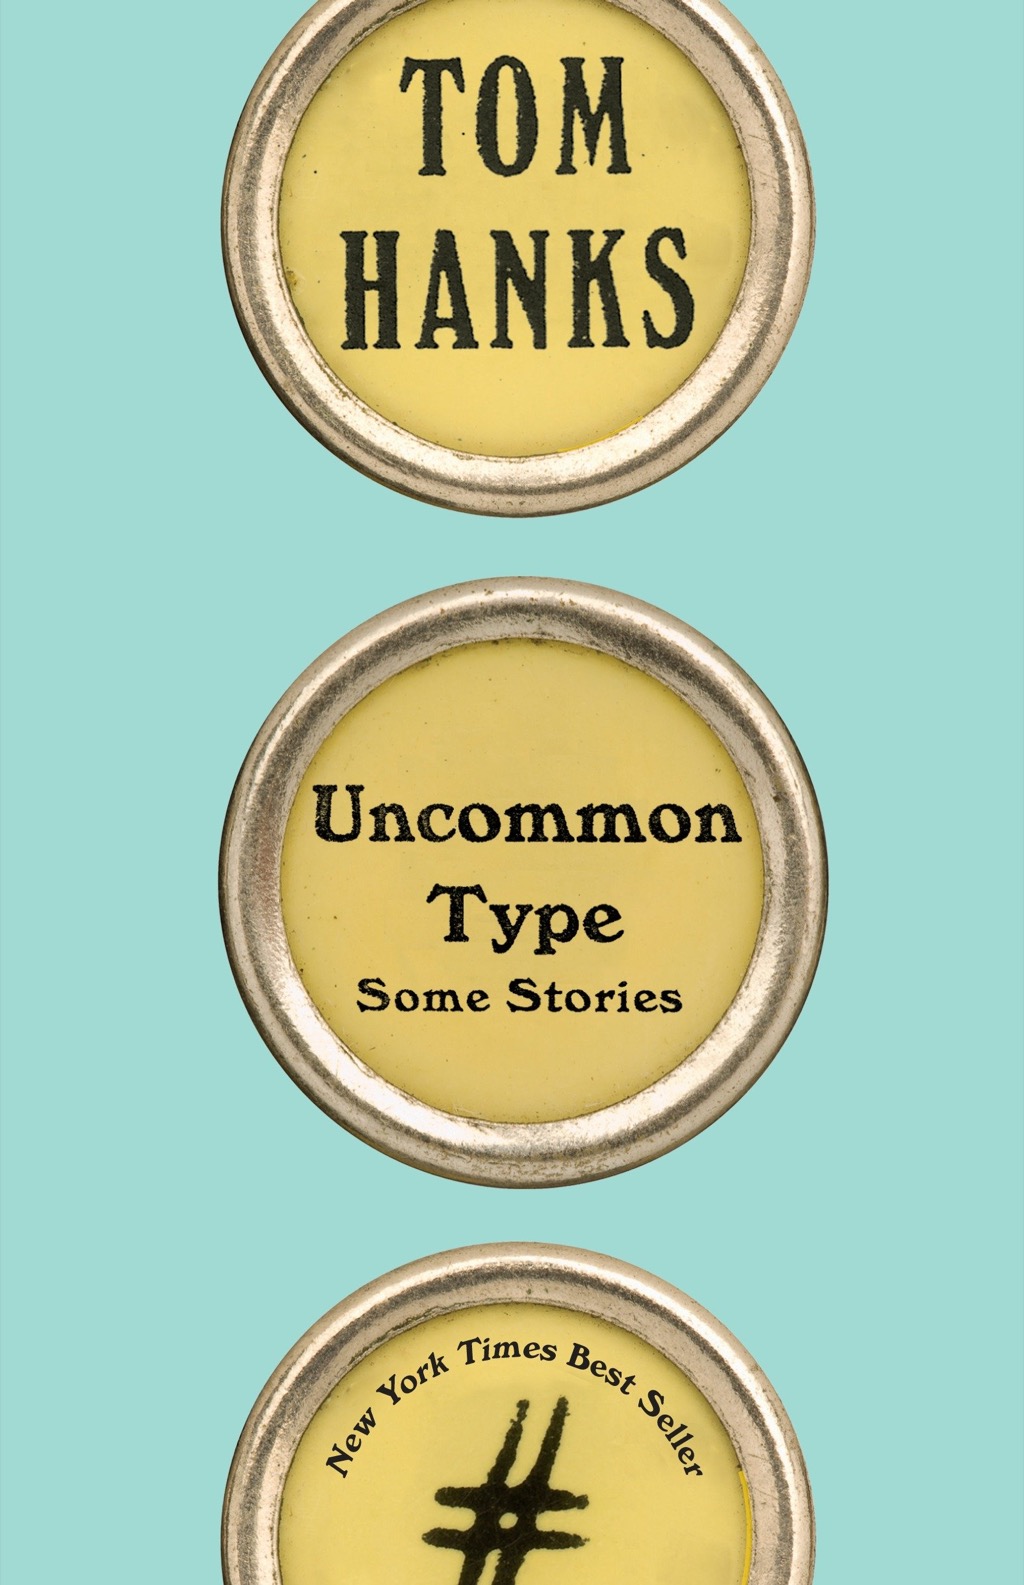 Uncommon Type books every woman should read in her 40s